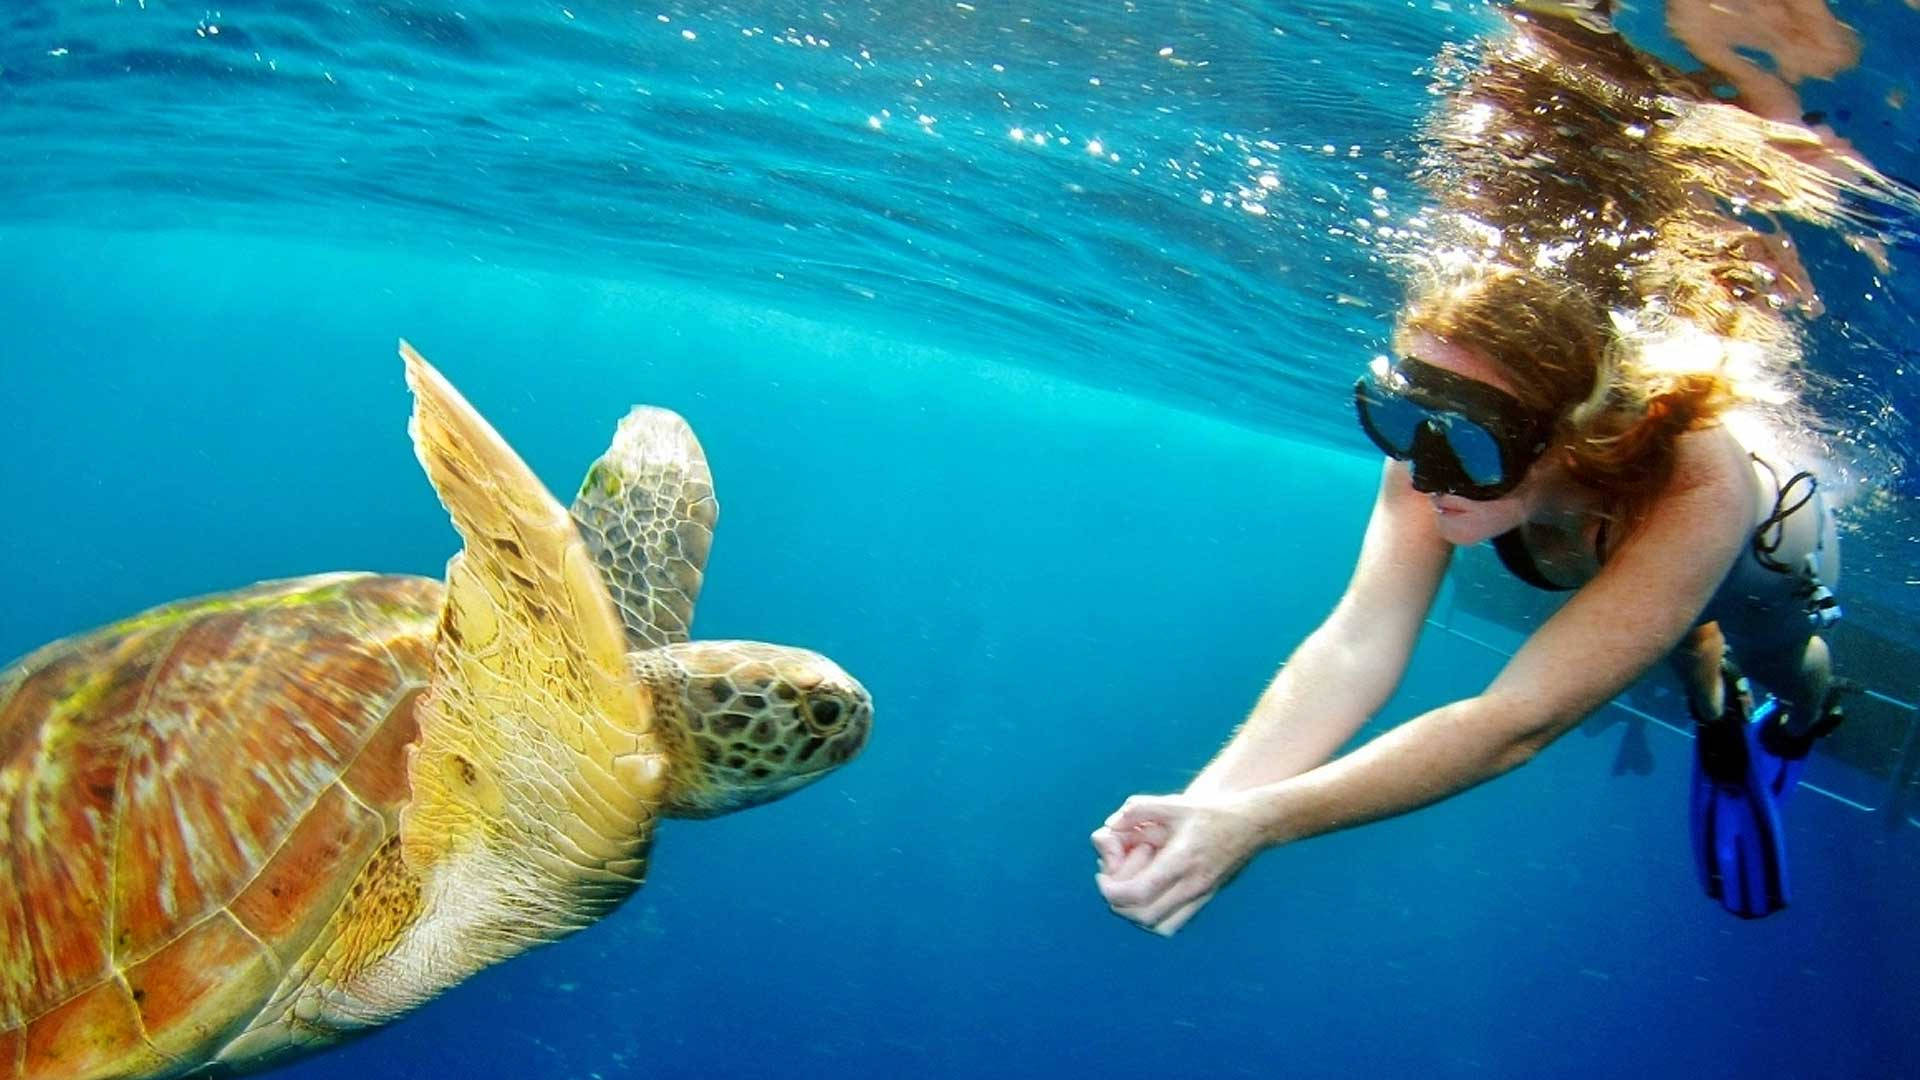 Snorkeling And Sea Turtle Wallpaper